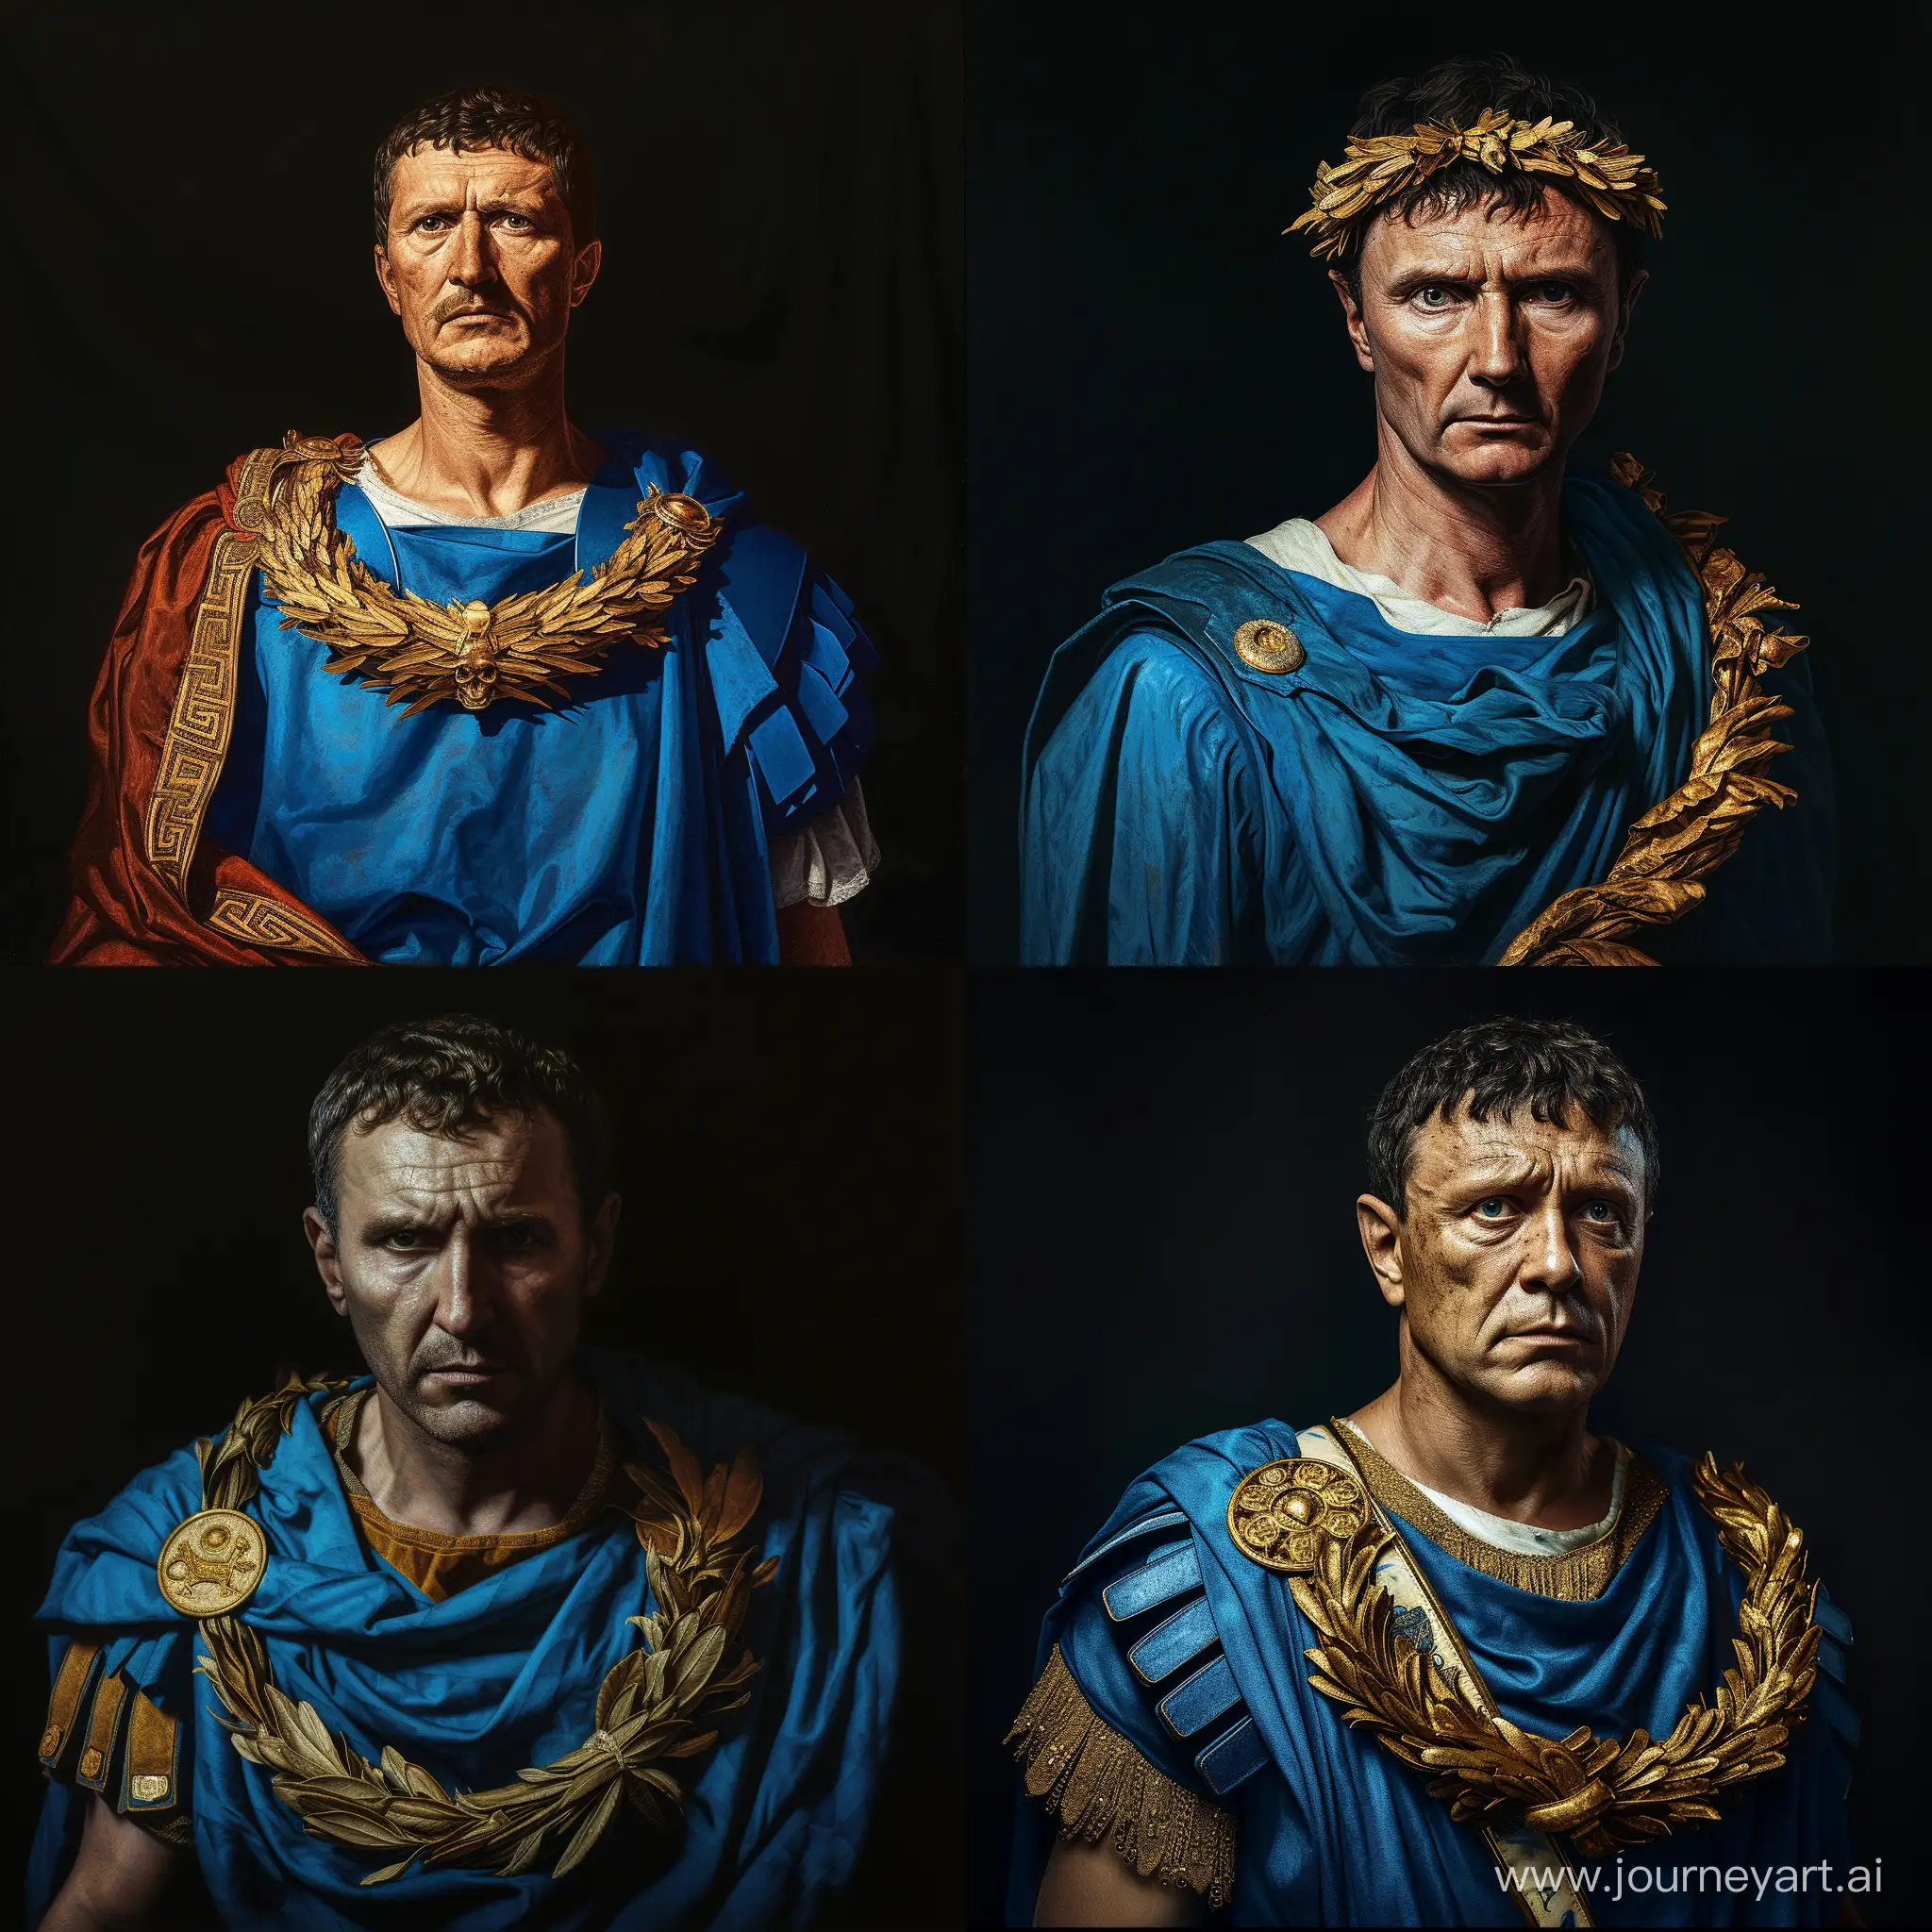 the Roman dictator in a blue tunic with a golden wreath. A tyrant. portrait on a black background